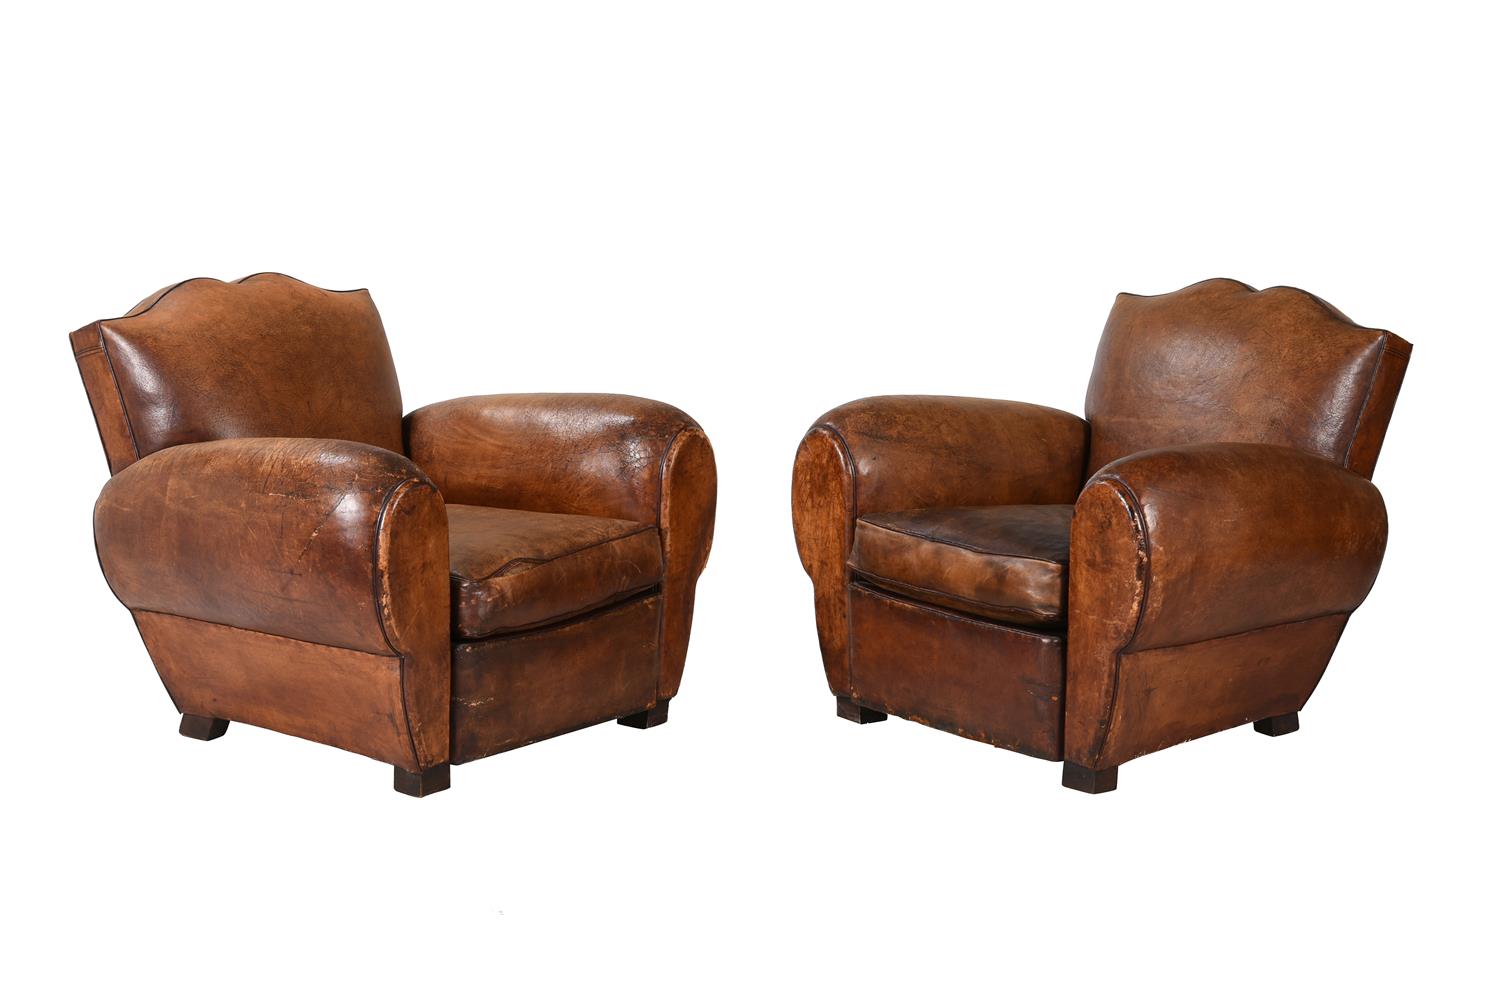 A PAIR OF ART DECO LEATHER ARMCHAIRS - Image 2 of 2